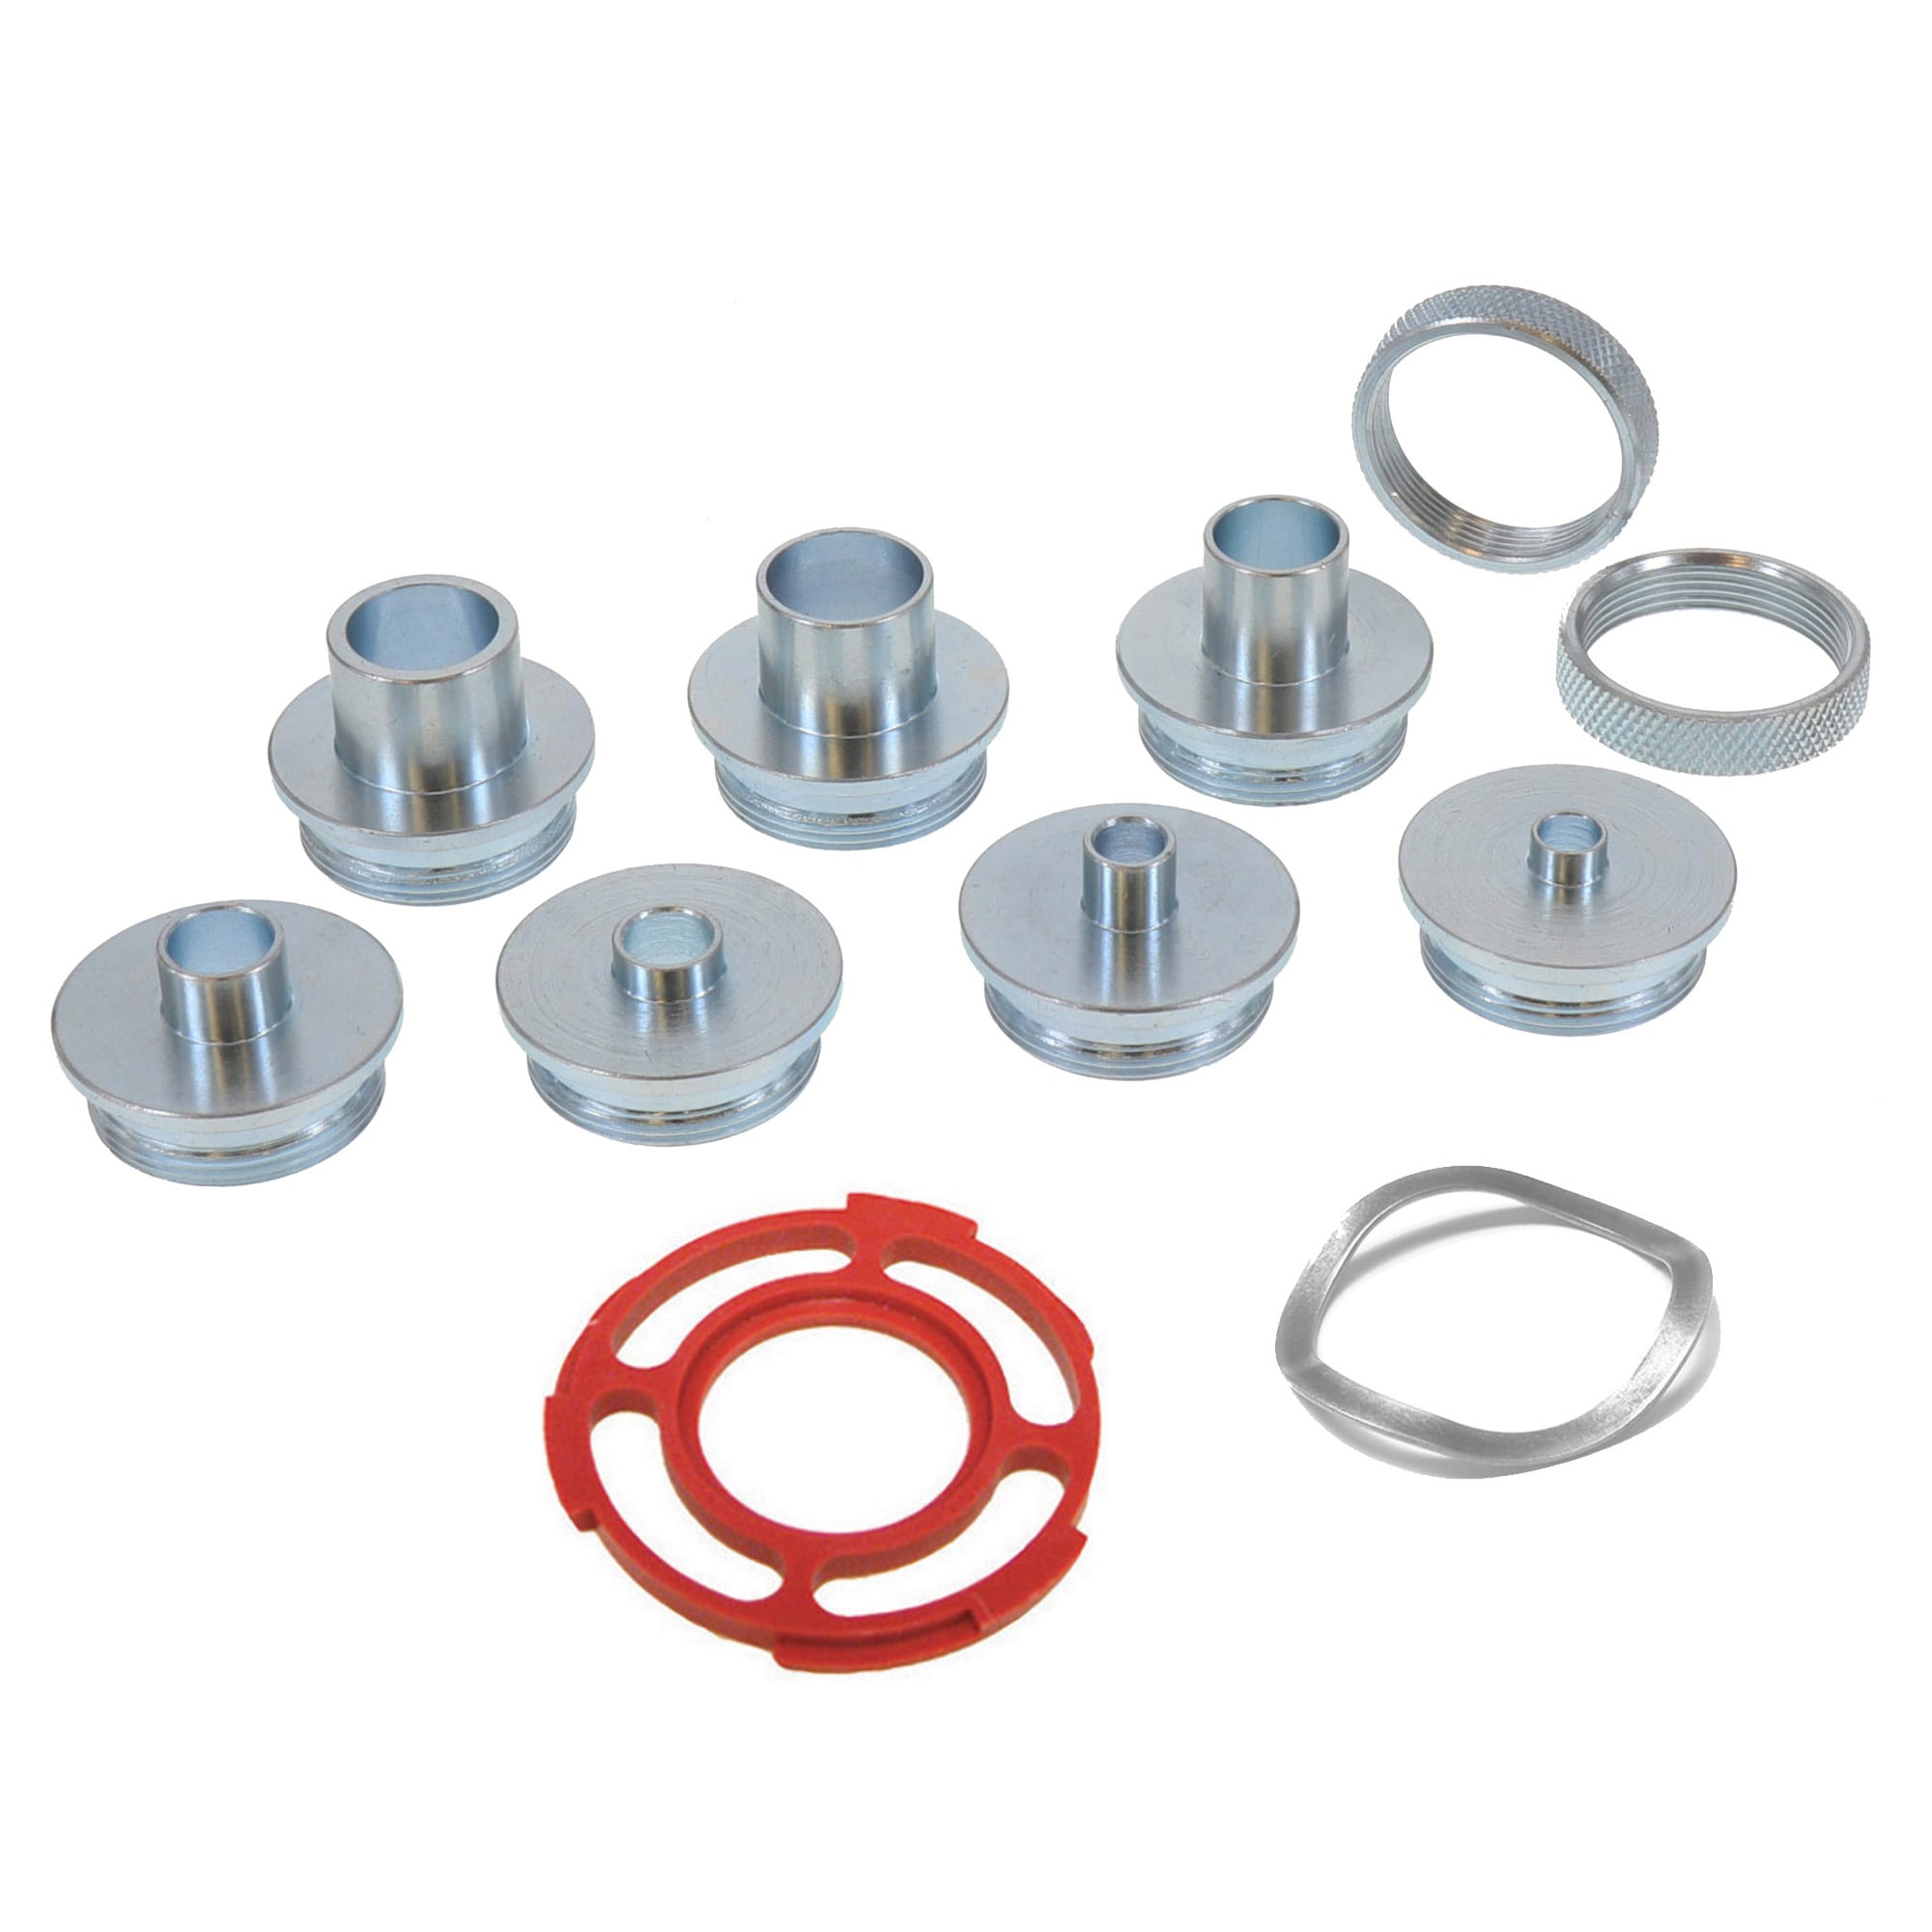 Router Letter Template Set Aluminum Alloy 10 Pcs Portable Easy To Use  Router Template Guides Bushing For Industrial